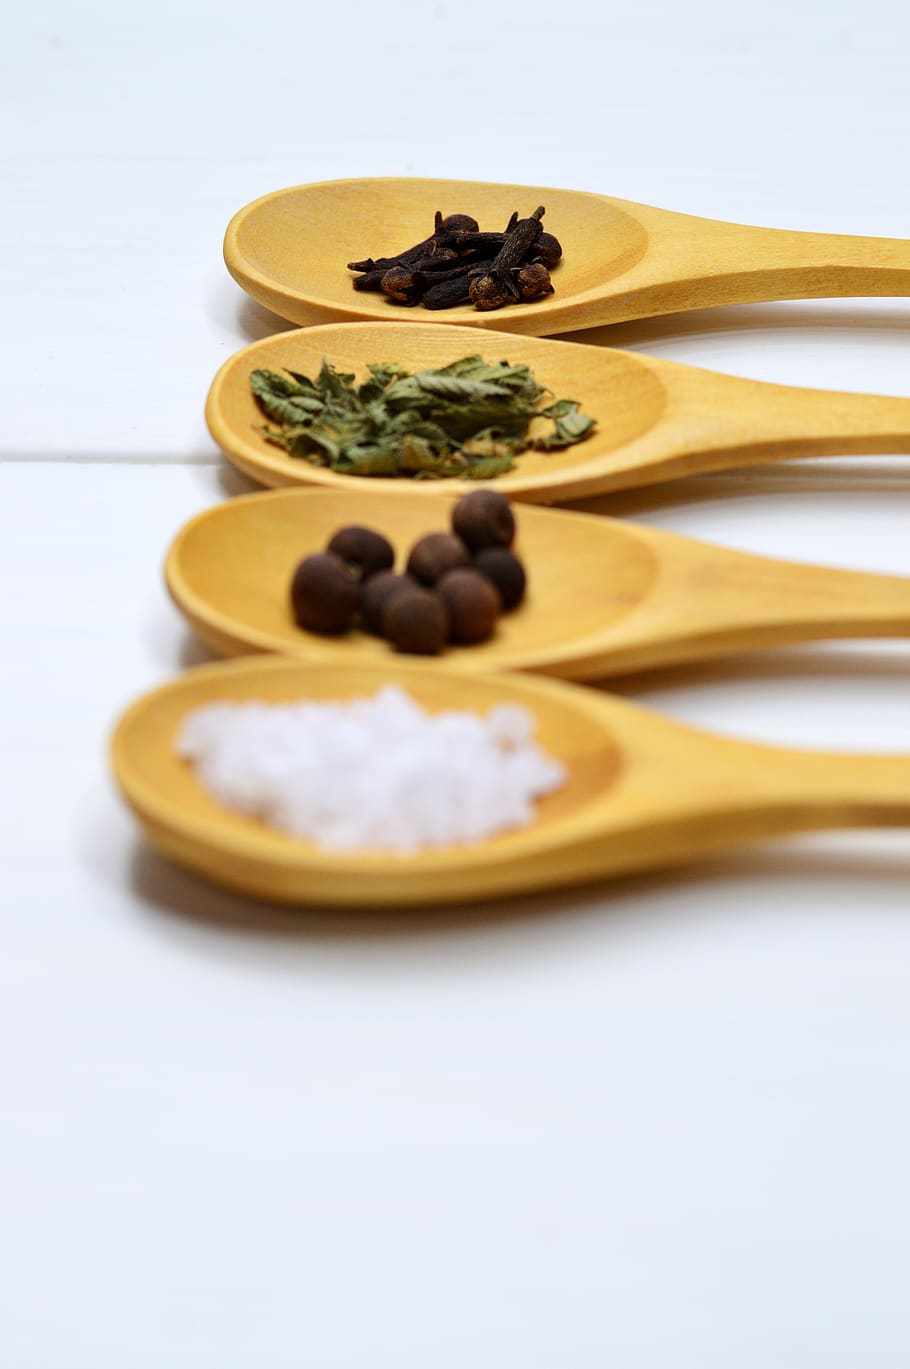 wood, food, spoon, traditional, healthy, approach, isolated, culinary art, salt, pepper